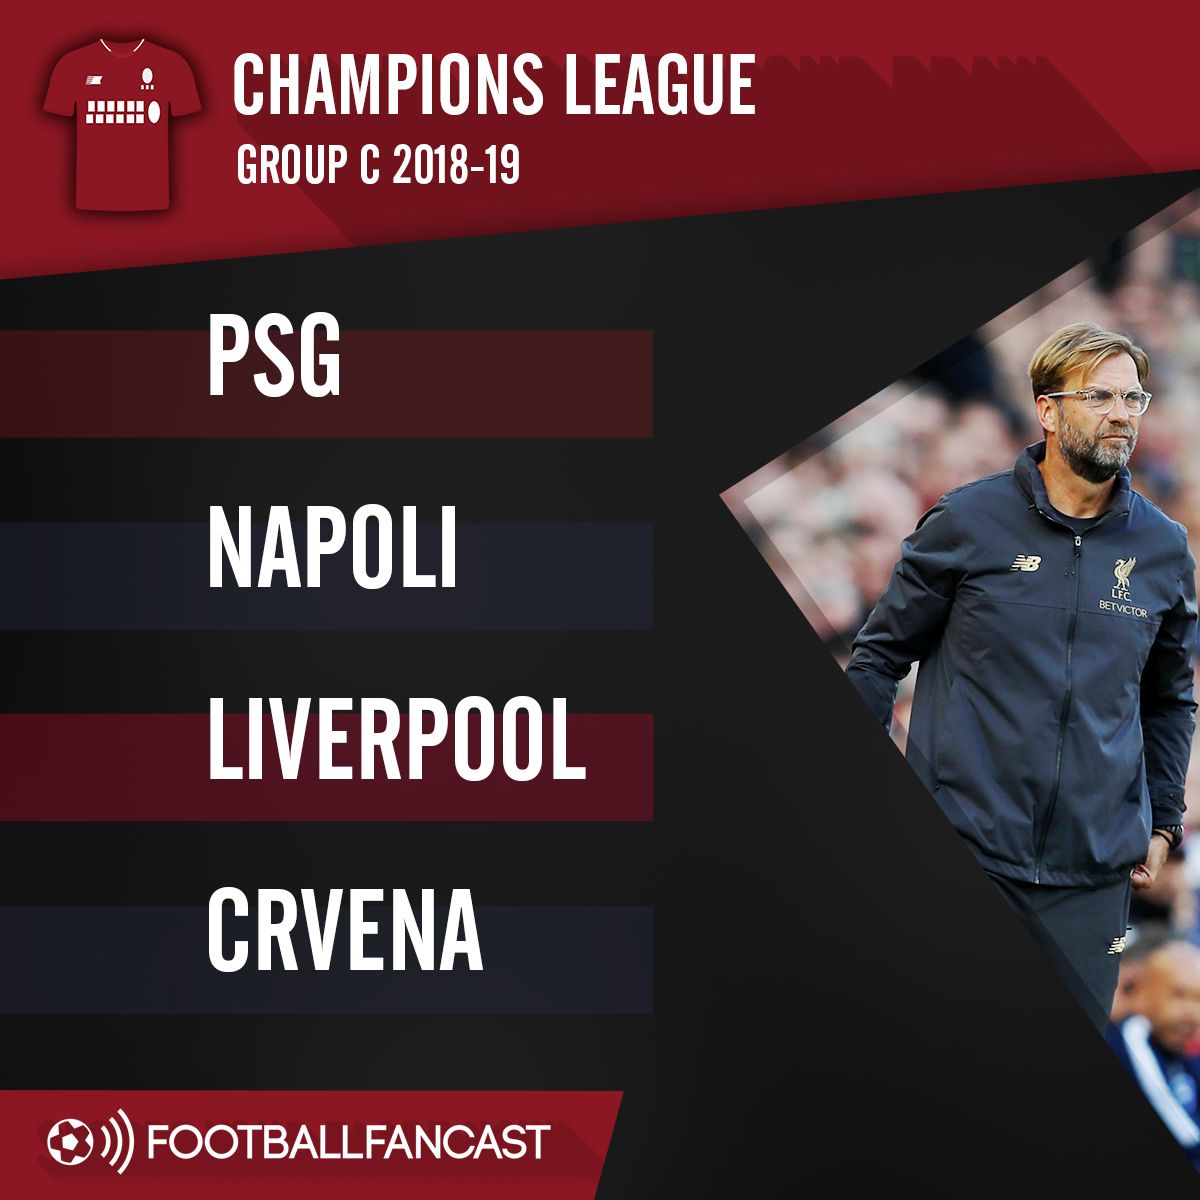 Liverpool's Champions League group